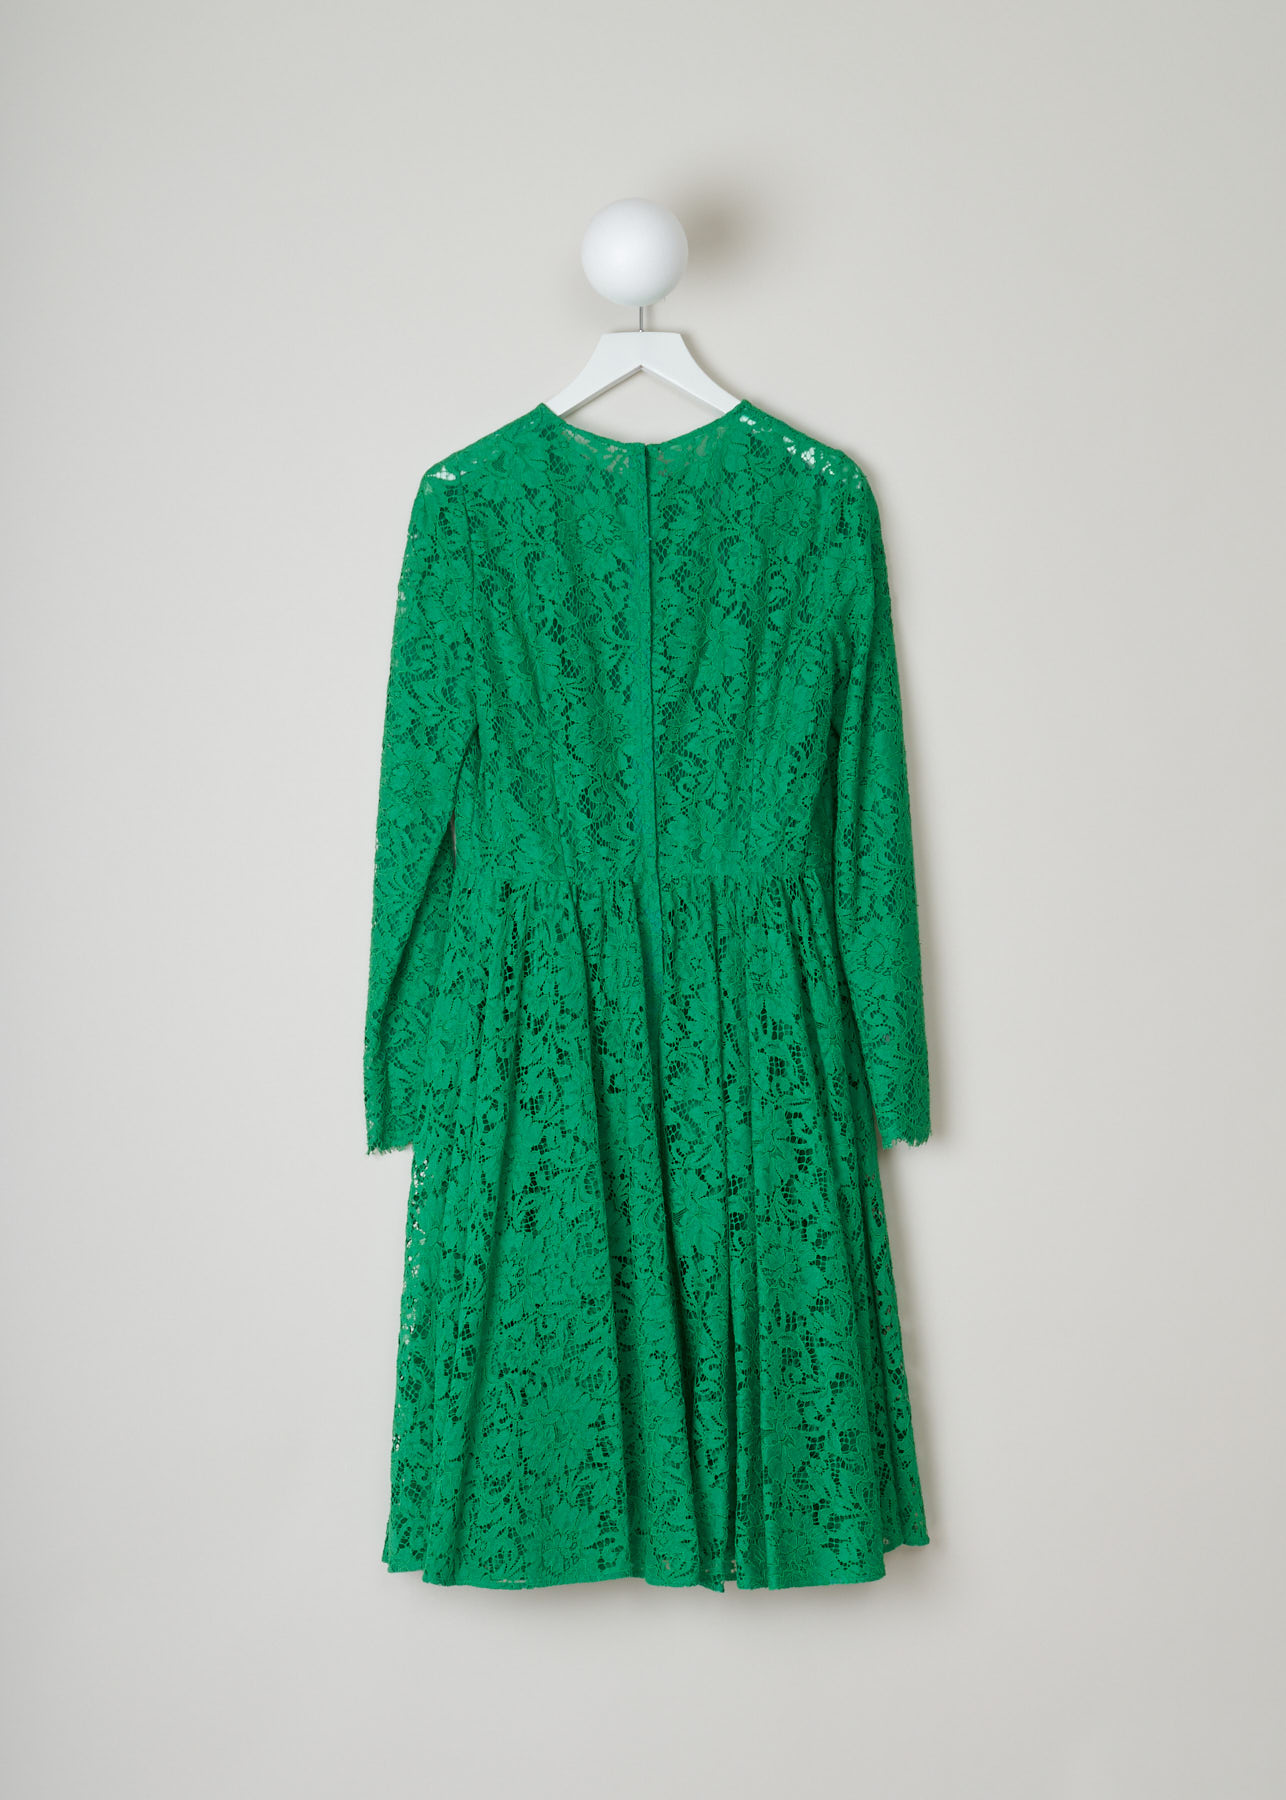 Dolce & Gabbana, Floral laced long sleeve flaired dress,  F6VB6T_FLM9V_V0402, back, An intricately laced dress, with an beautifull floral patern stitched on a green meshing. Long frilled sleeves. Closes with a zip fastening along the back.